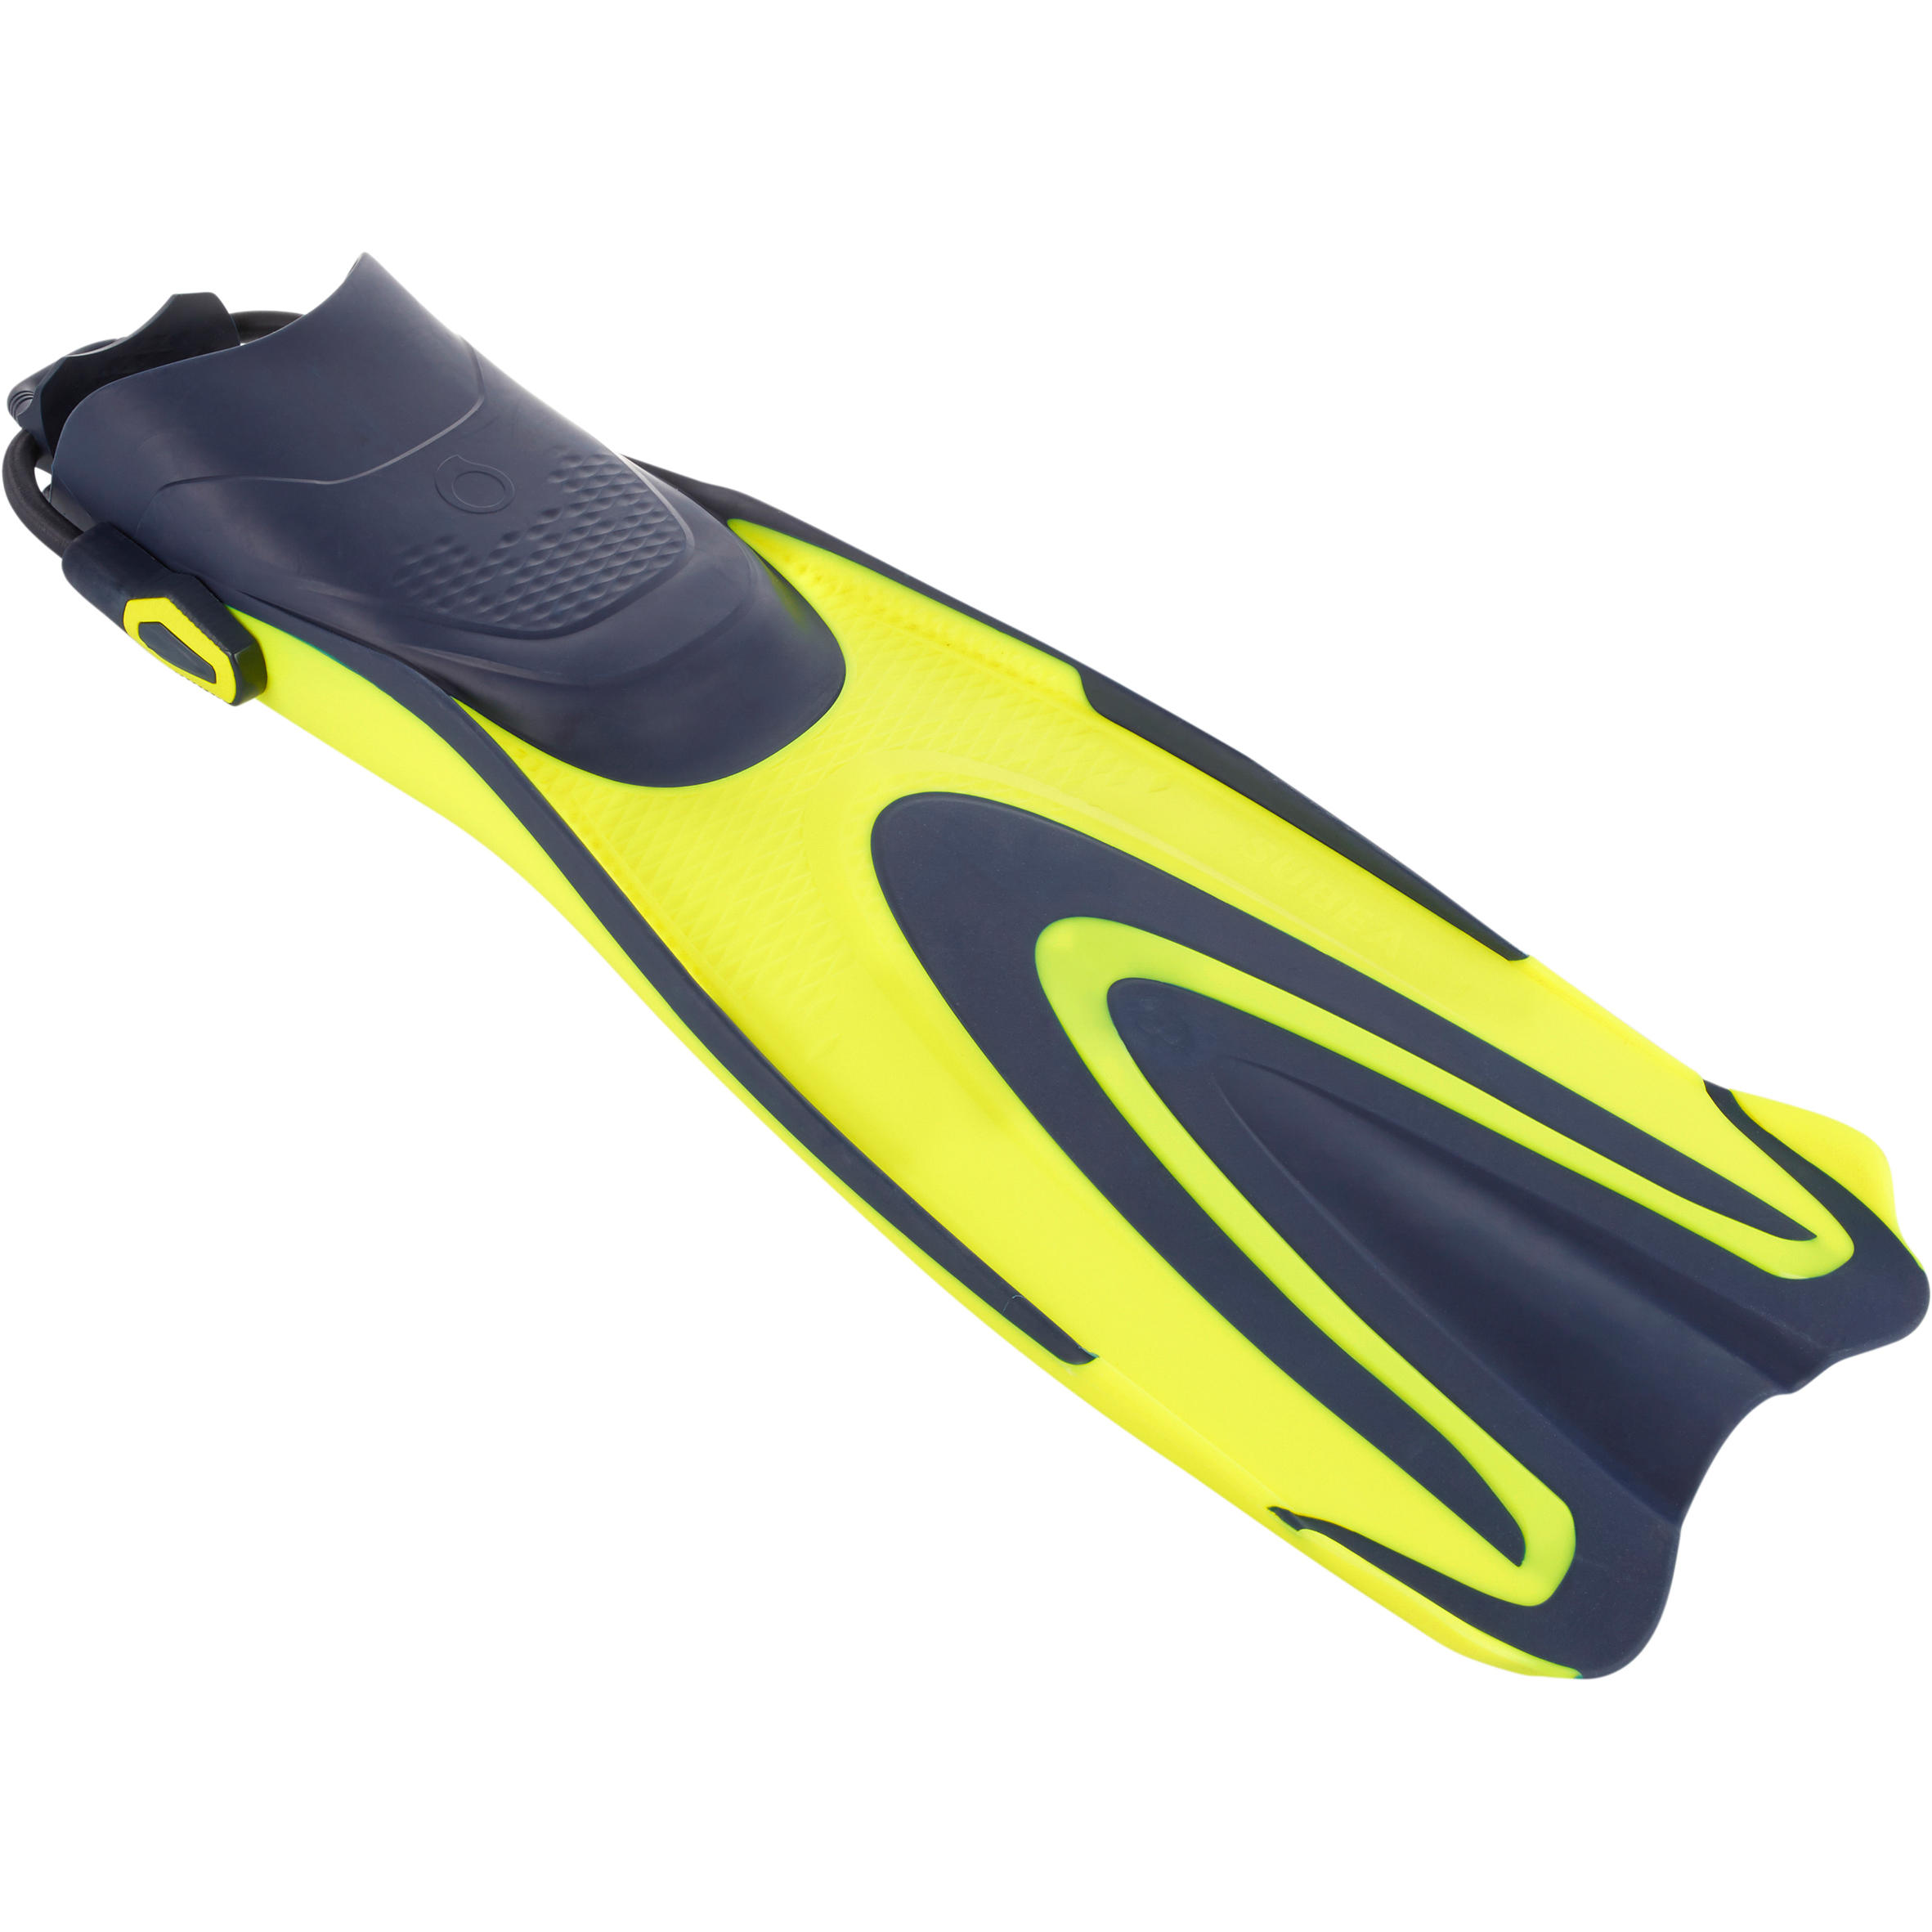 SUBEA Diving fins adjustable OH 500 soft neon yellow